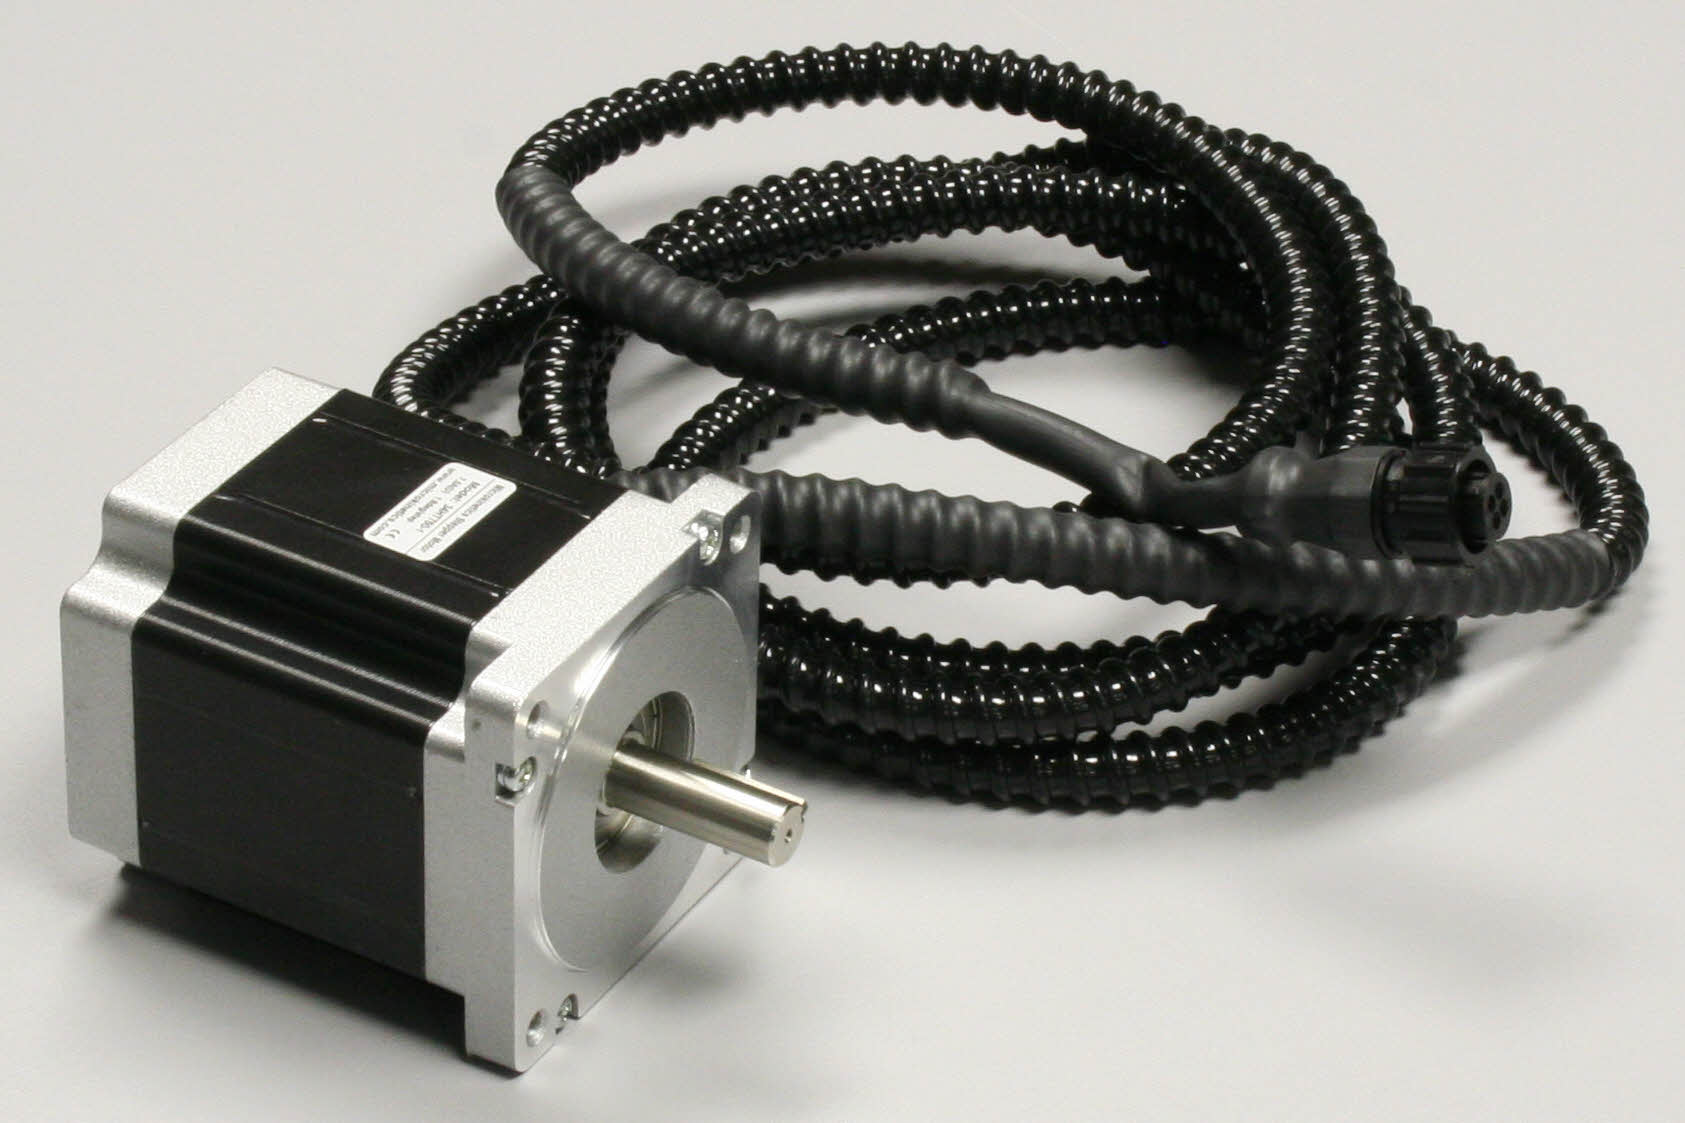 13HT750 motor with armored cable